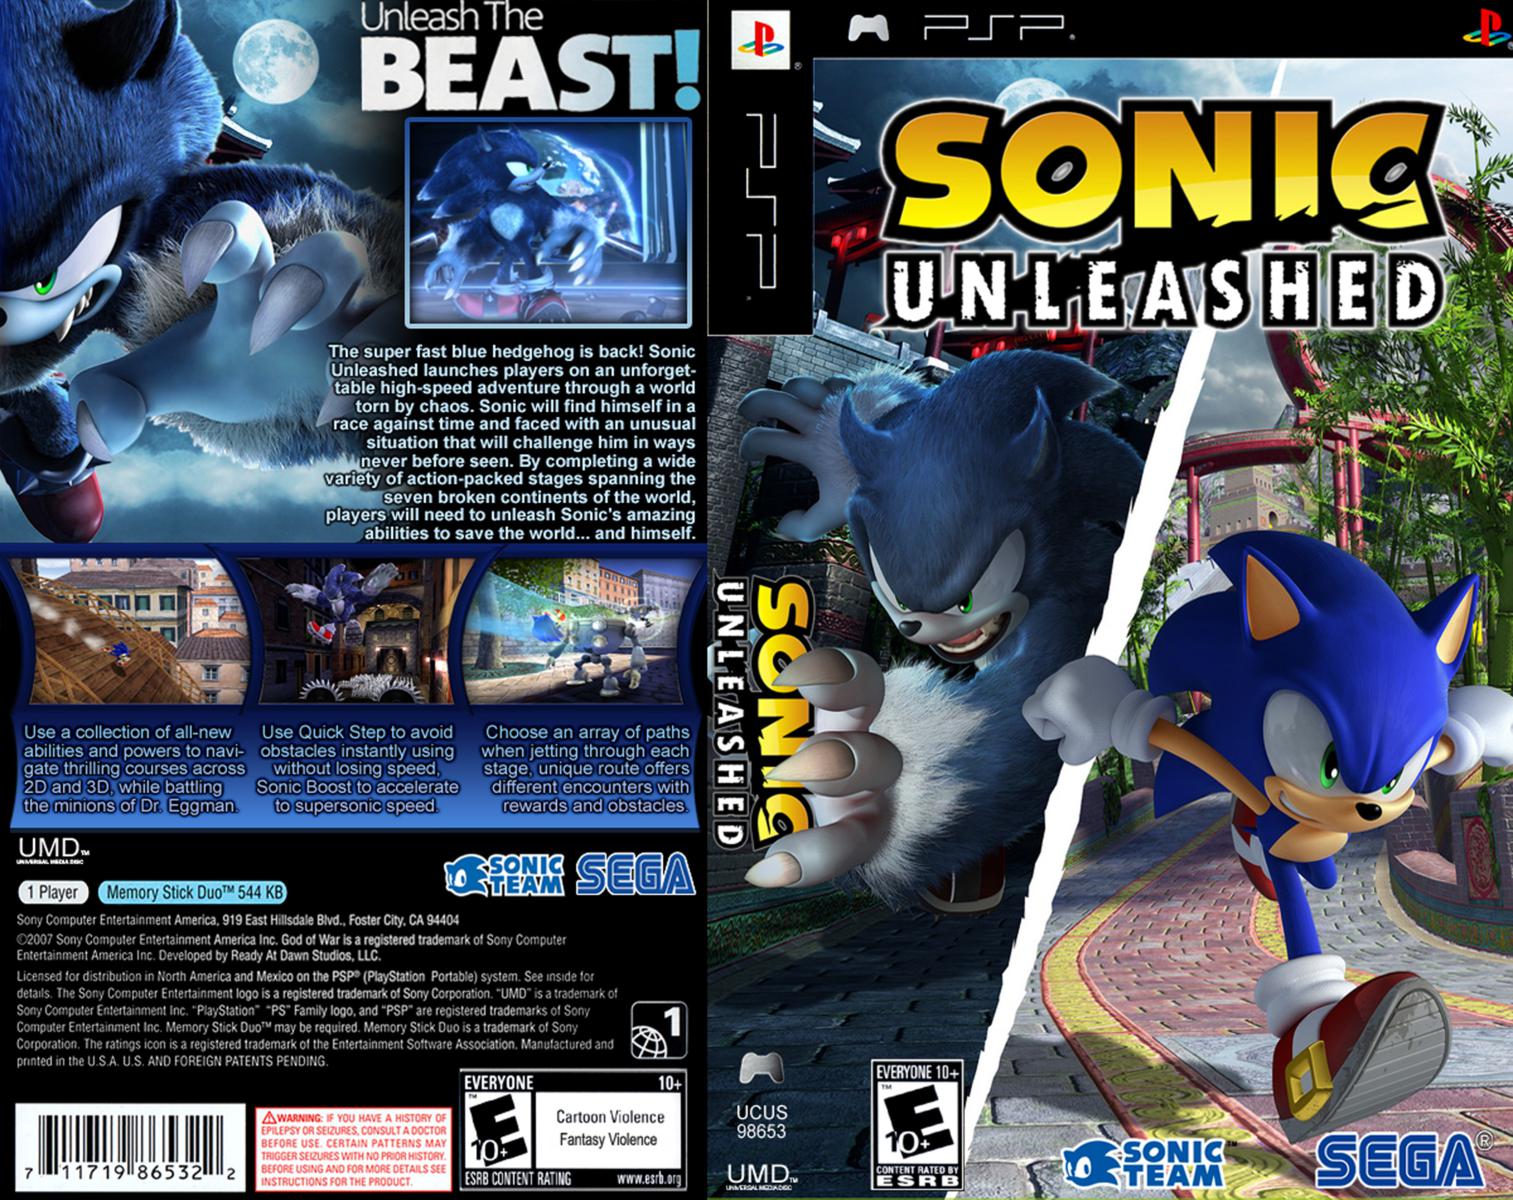 who made sonic unleashed ps2